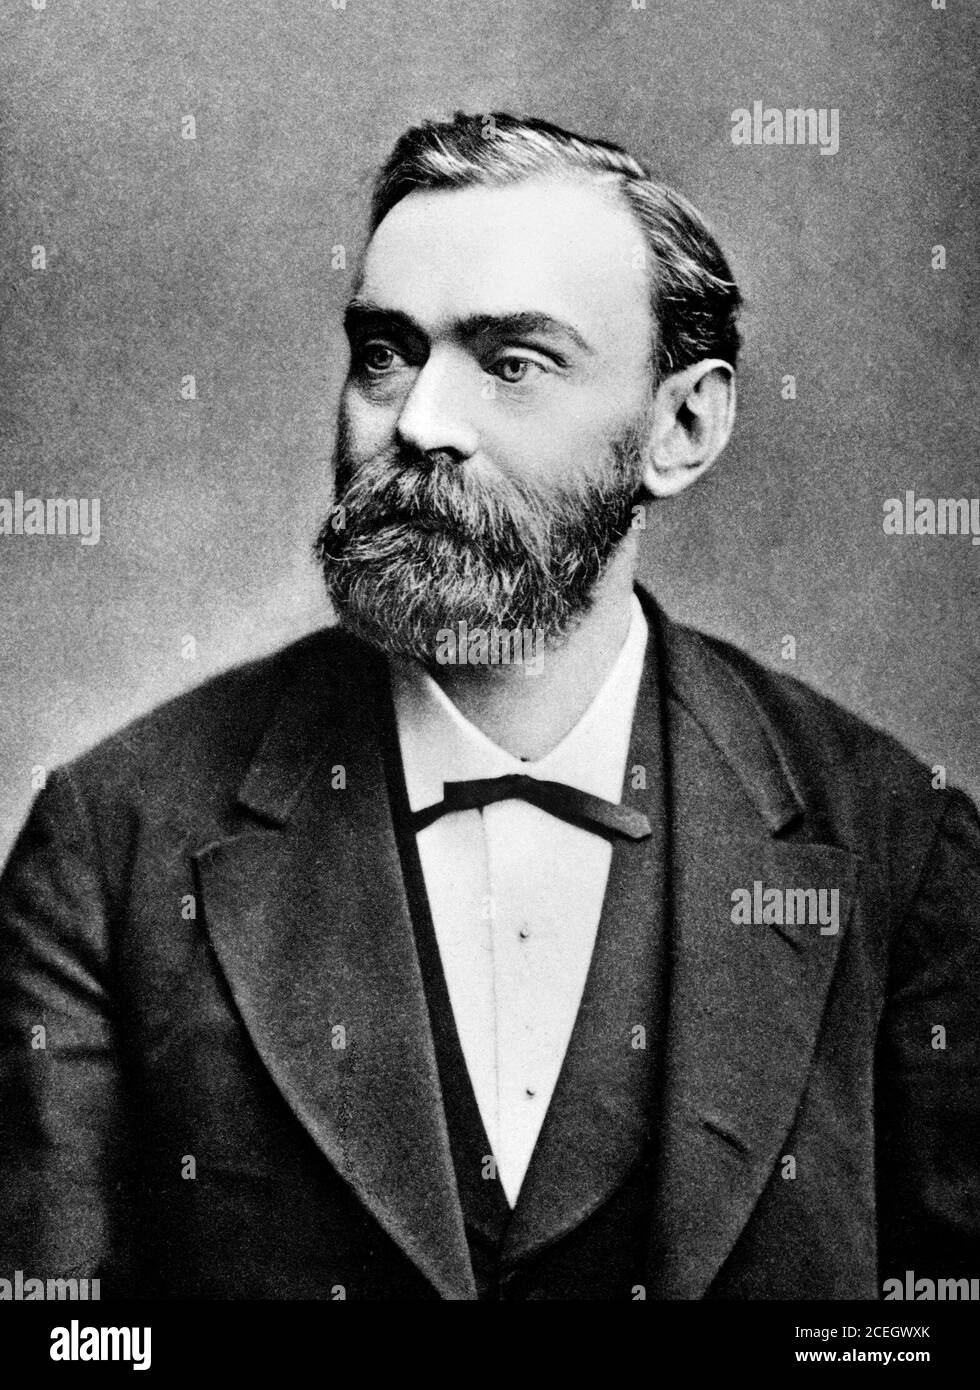 Alfred Nobel, portrait. Alfred Bernhard Nobel (1833-1896) was a Swedish chemist, engineer, inventor, businessman and philanthropist, who is most famous for funding the Nobel Prize. Stock Photo